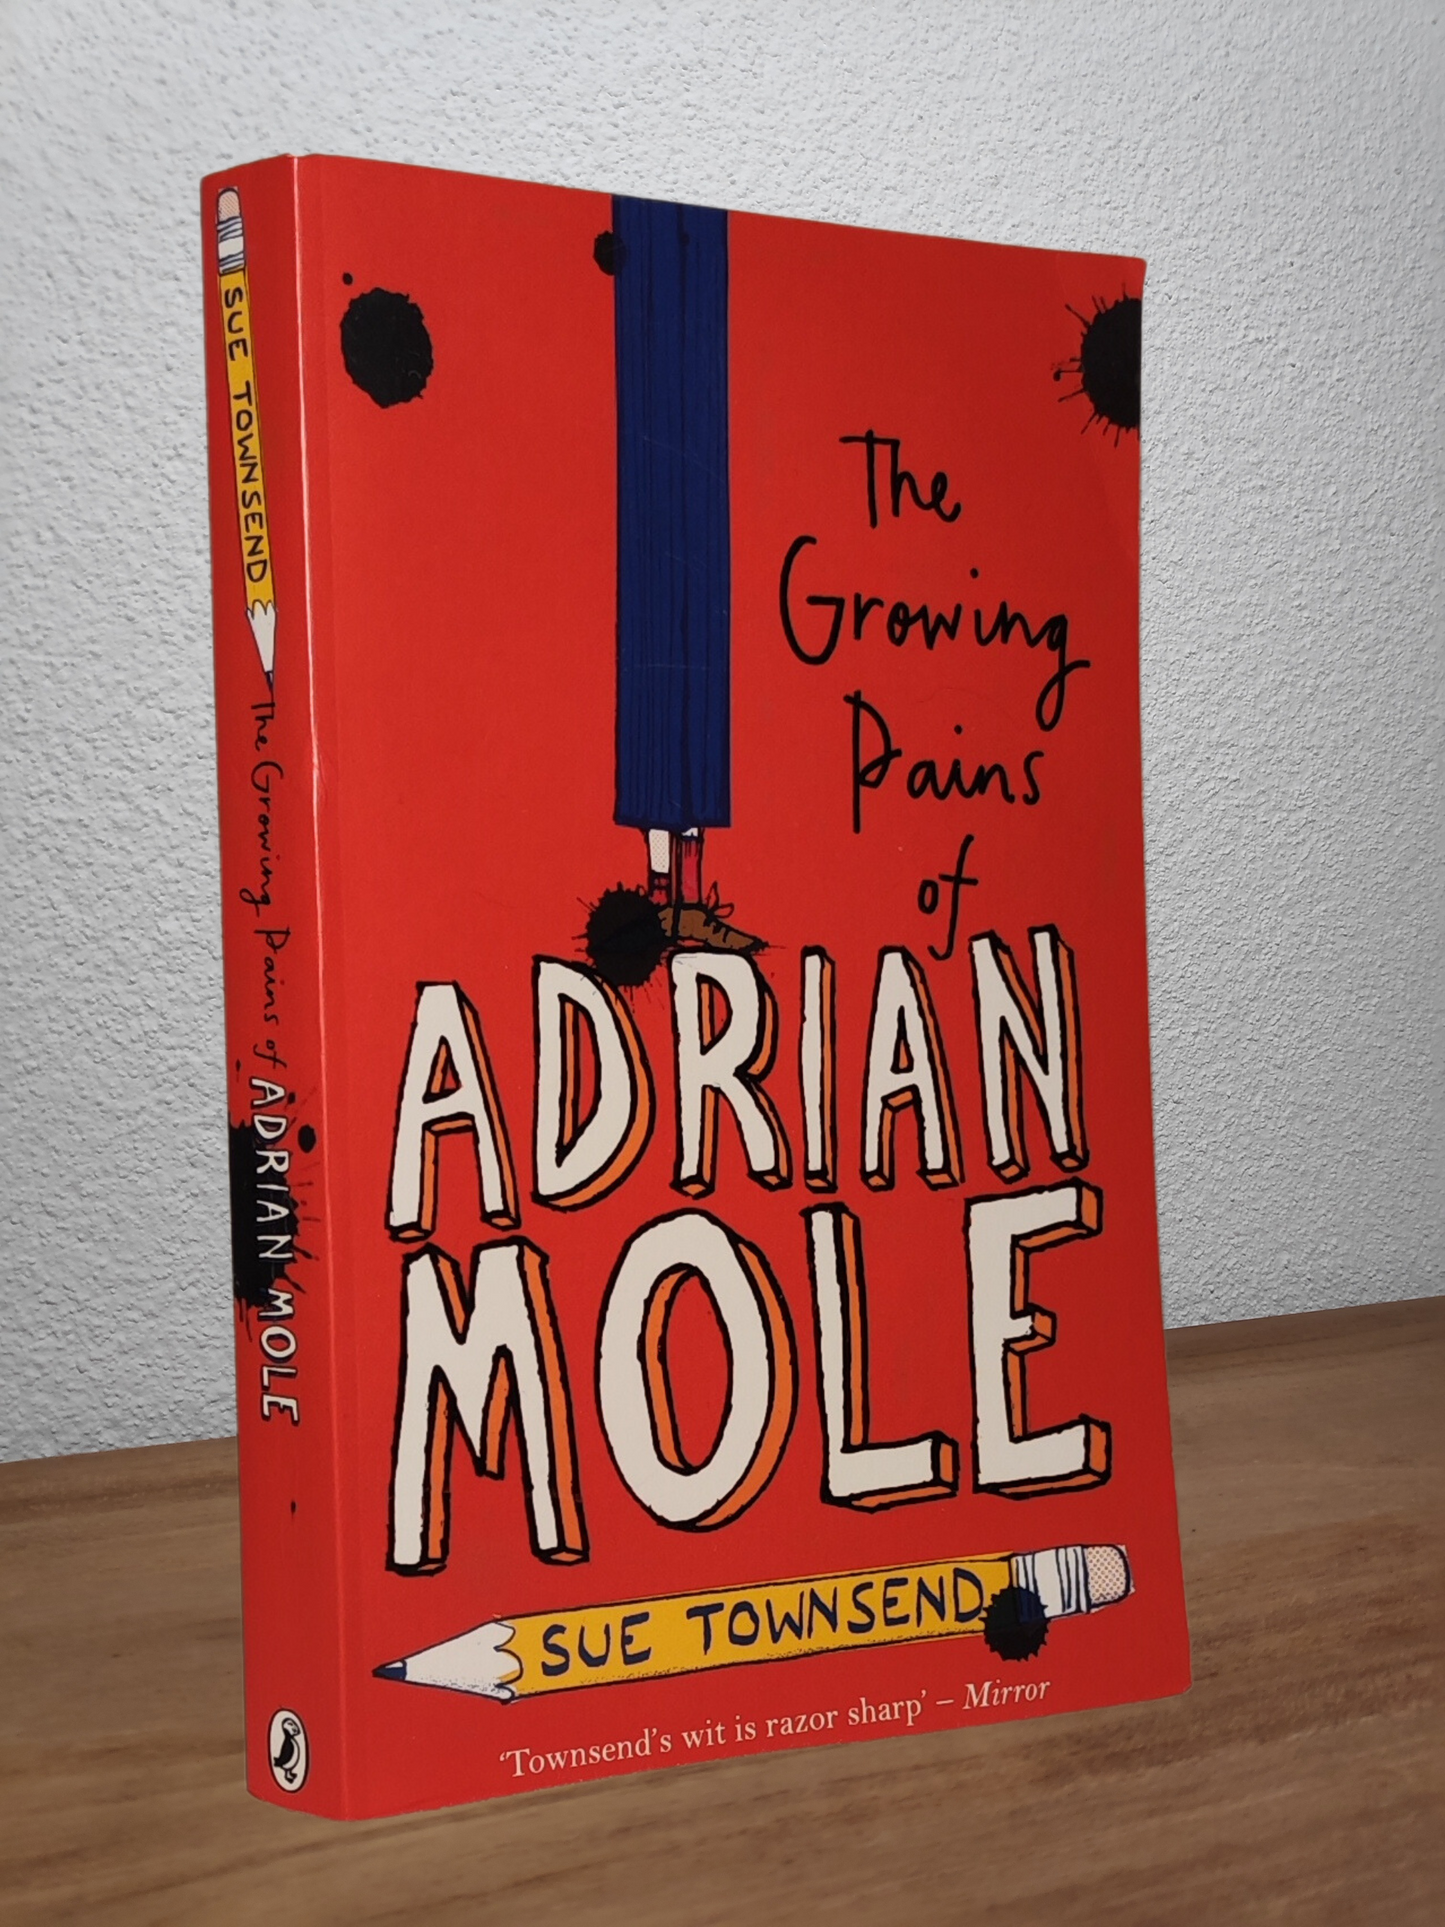 Sue Townsend - The Growing Pains of Adrian Mole  - Second-hand english book to deliver in Zurich & Switzerland